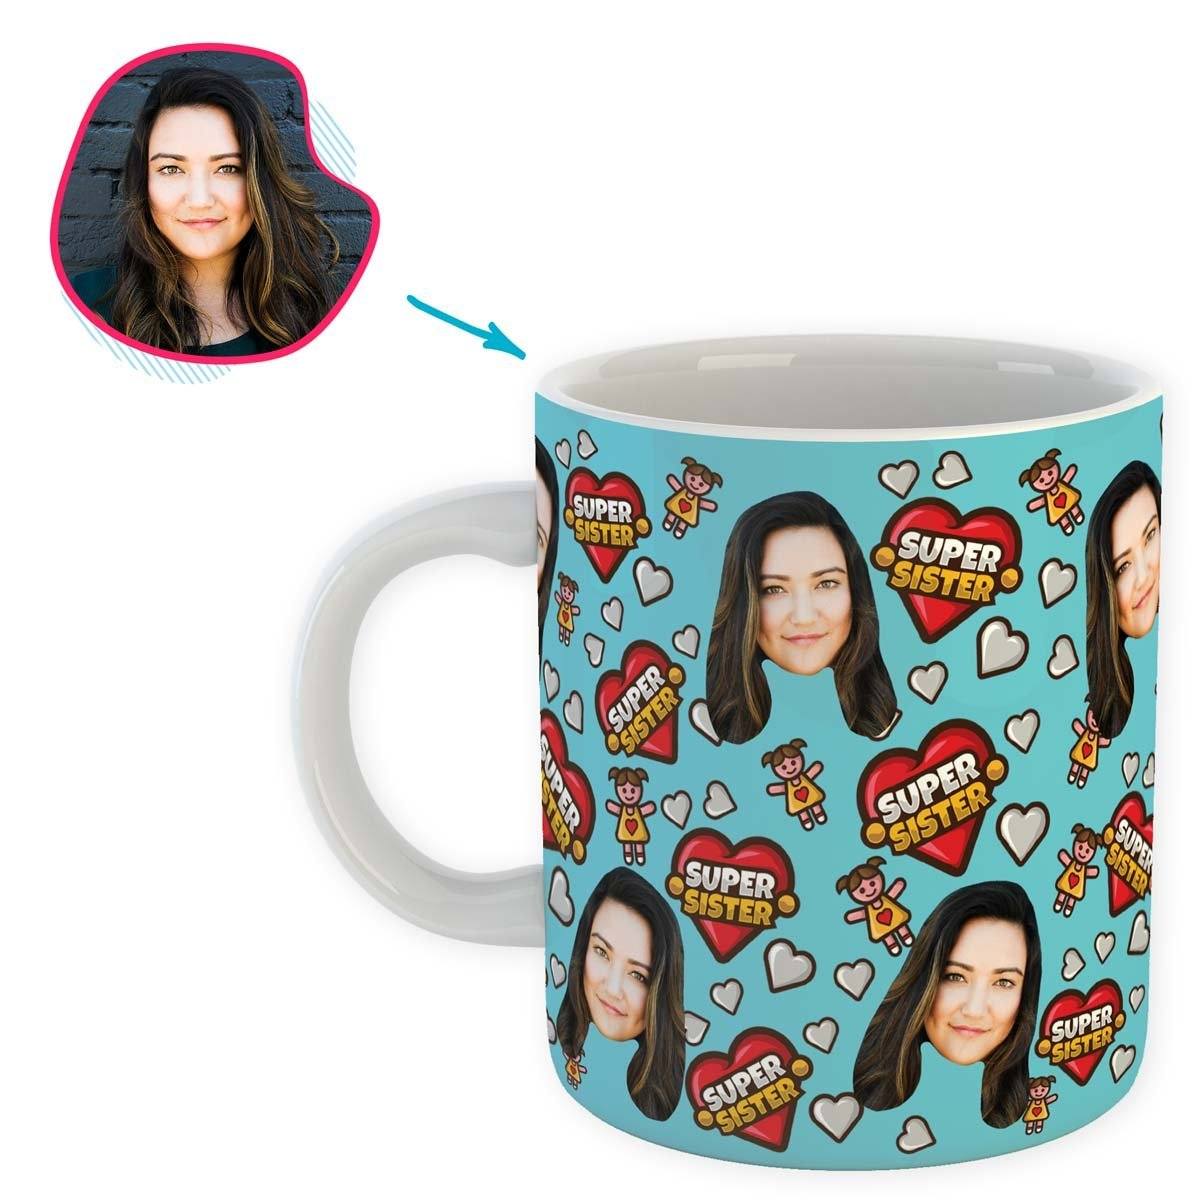 blue Super Sister mug personalized with photo of face printed on it